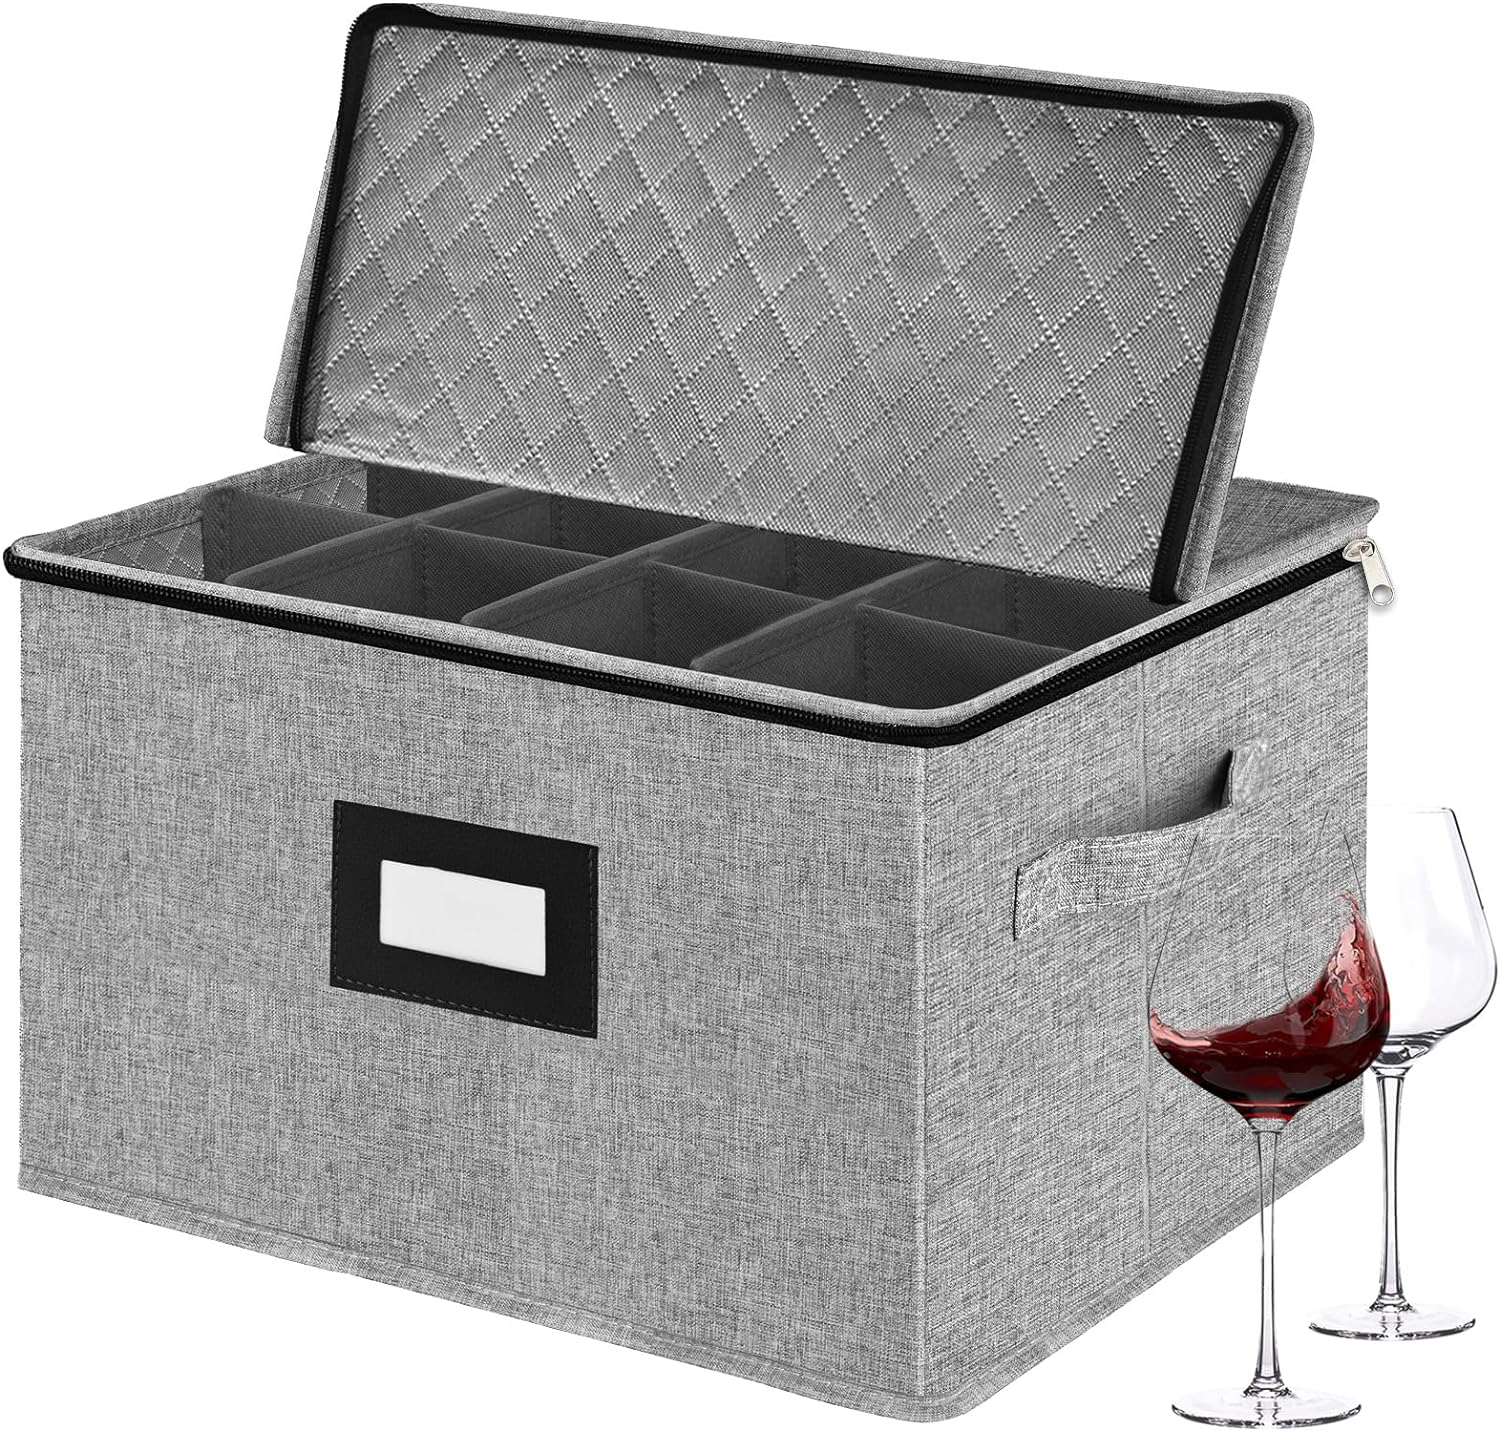 VERONLY Stemware Storage Cases,Quilted Wine glass Storage Boxes with Divider-China Storage Containers Hard Shell Holds 12 Wine Glass or Crystal Glassware Storage Containers, Stackable (Light Grey)